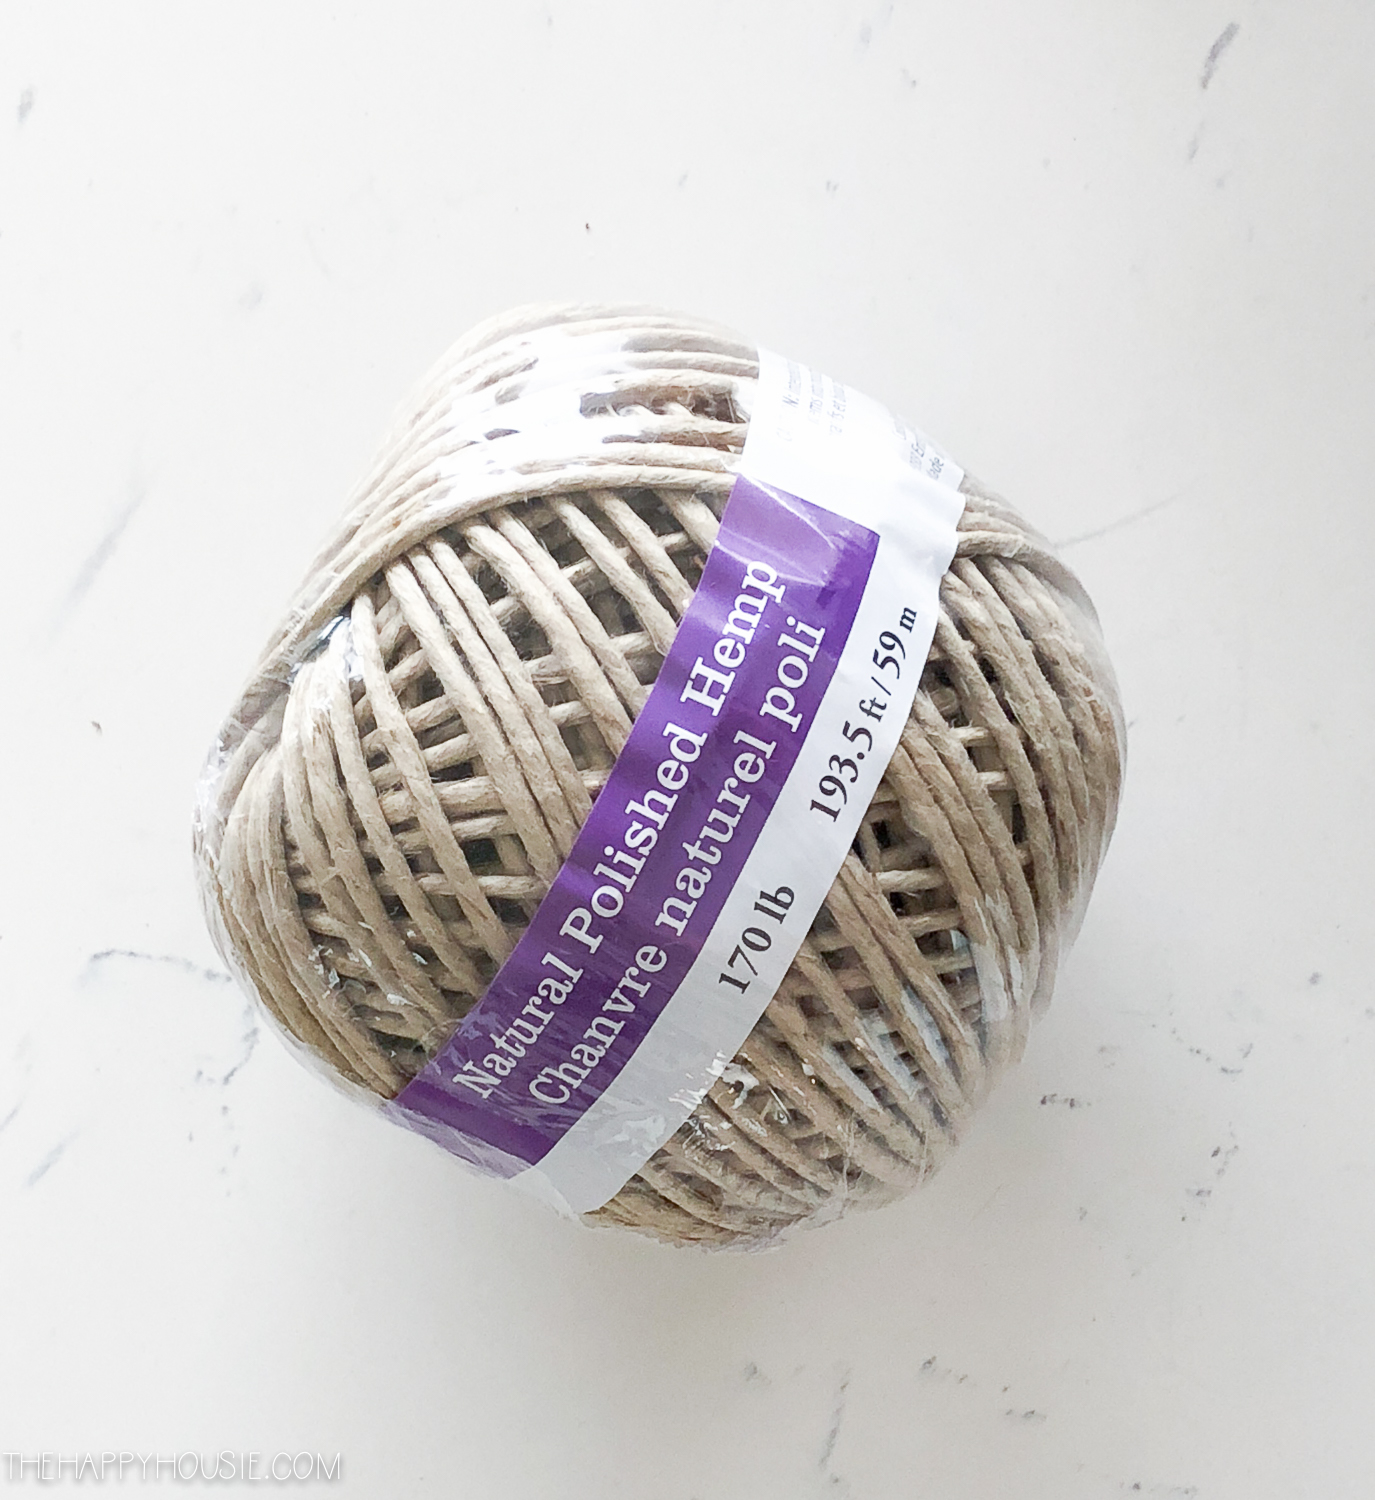 Hemp twine in its package on the counter.